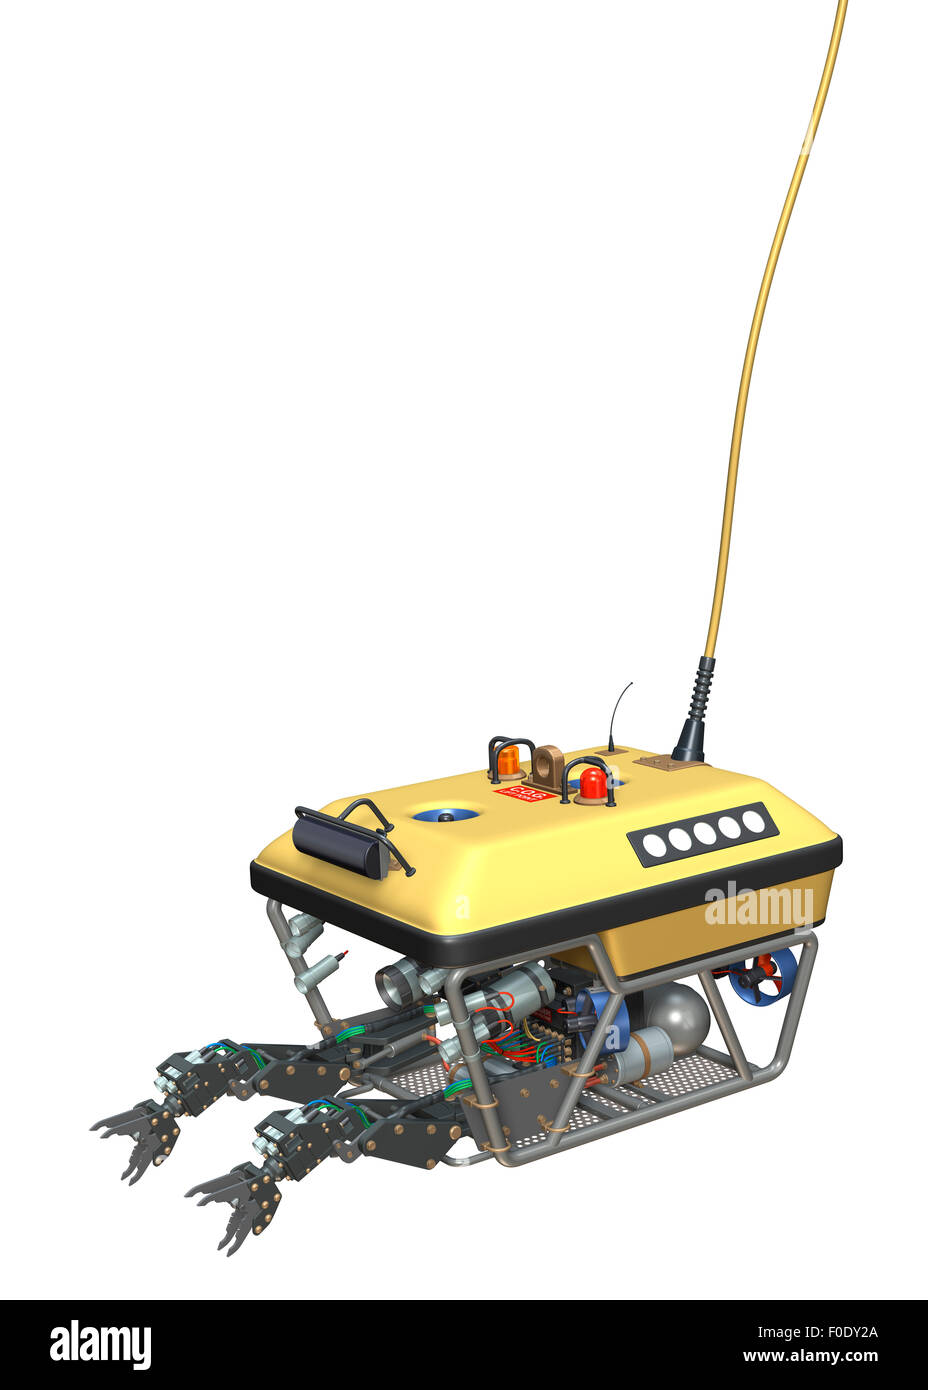 Underwater Remotely Operated Vehicle ROV Stock Photo